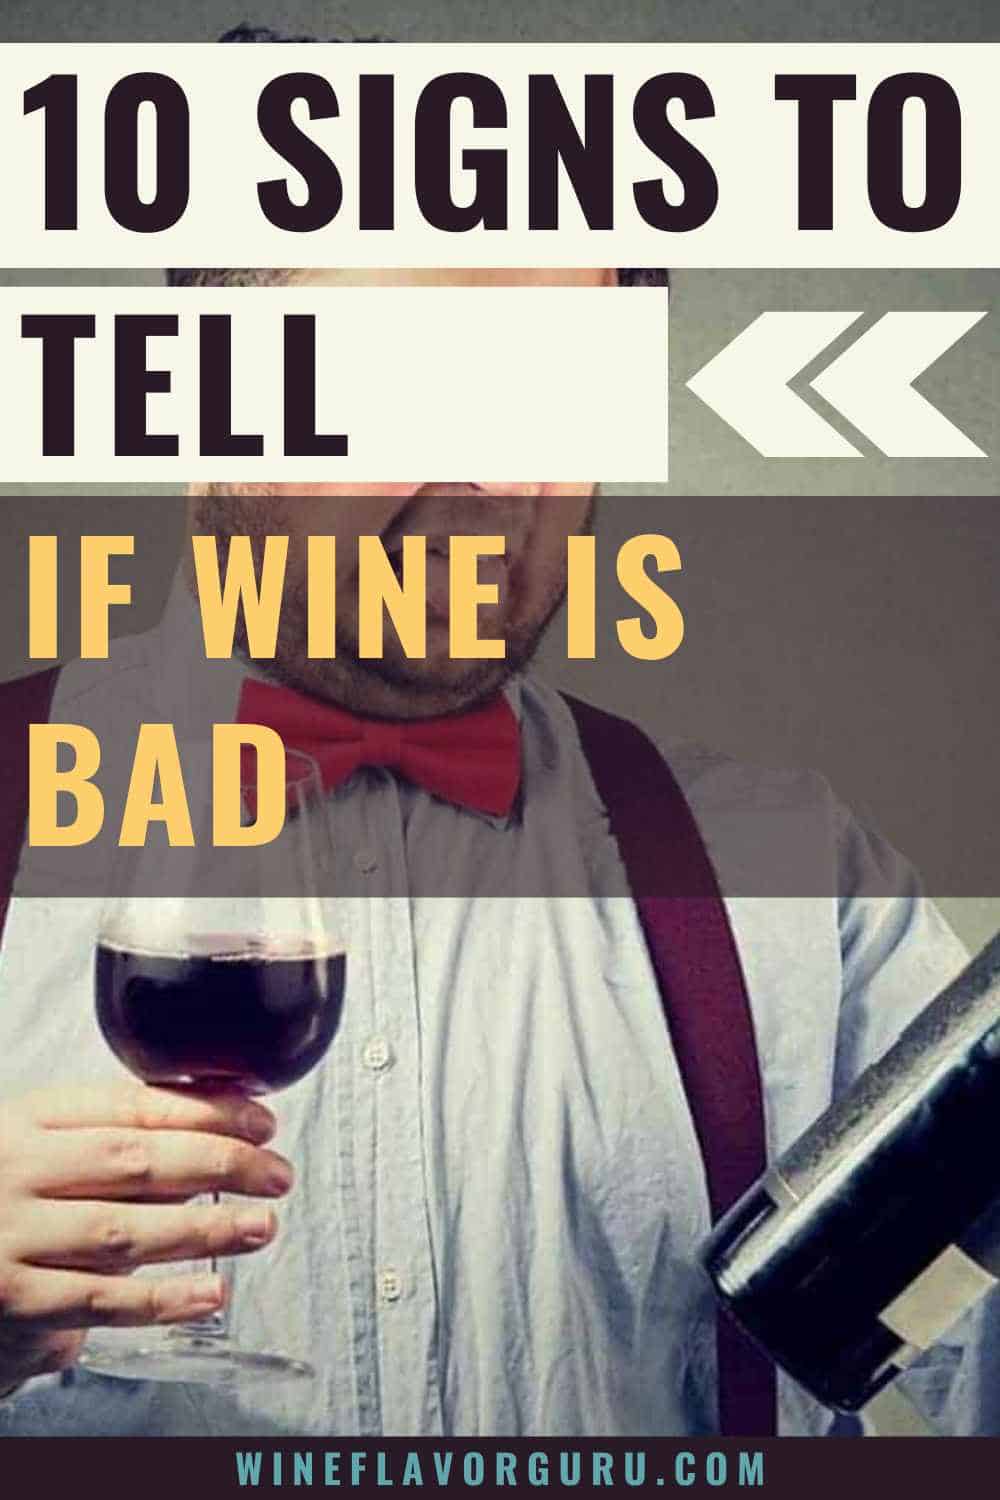 Signs to Tell if Wine is Bad